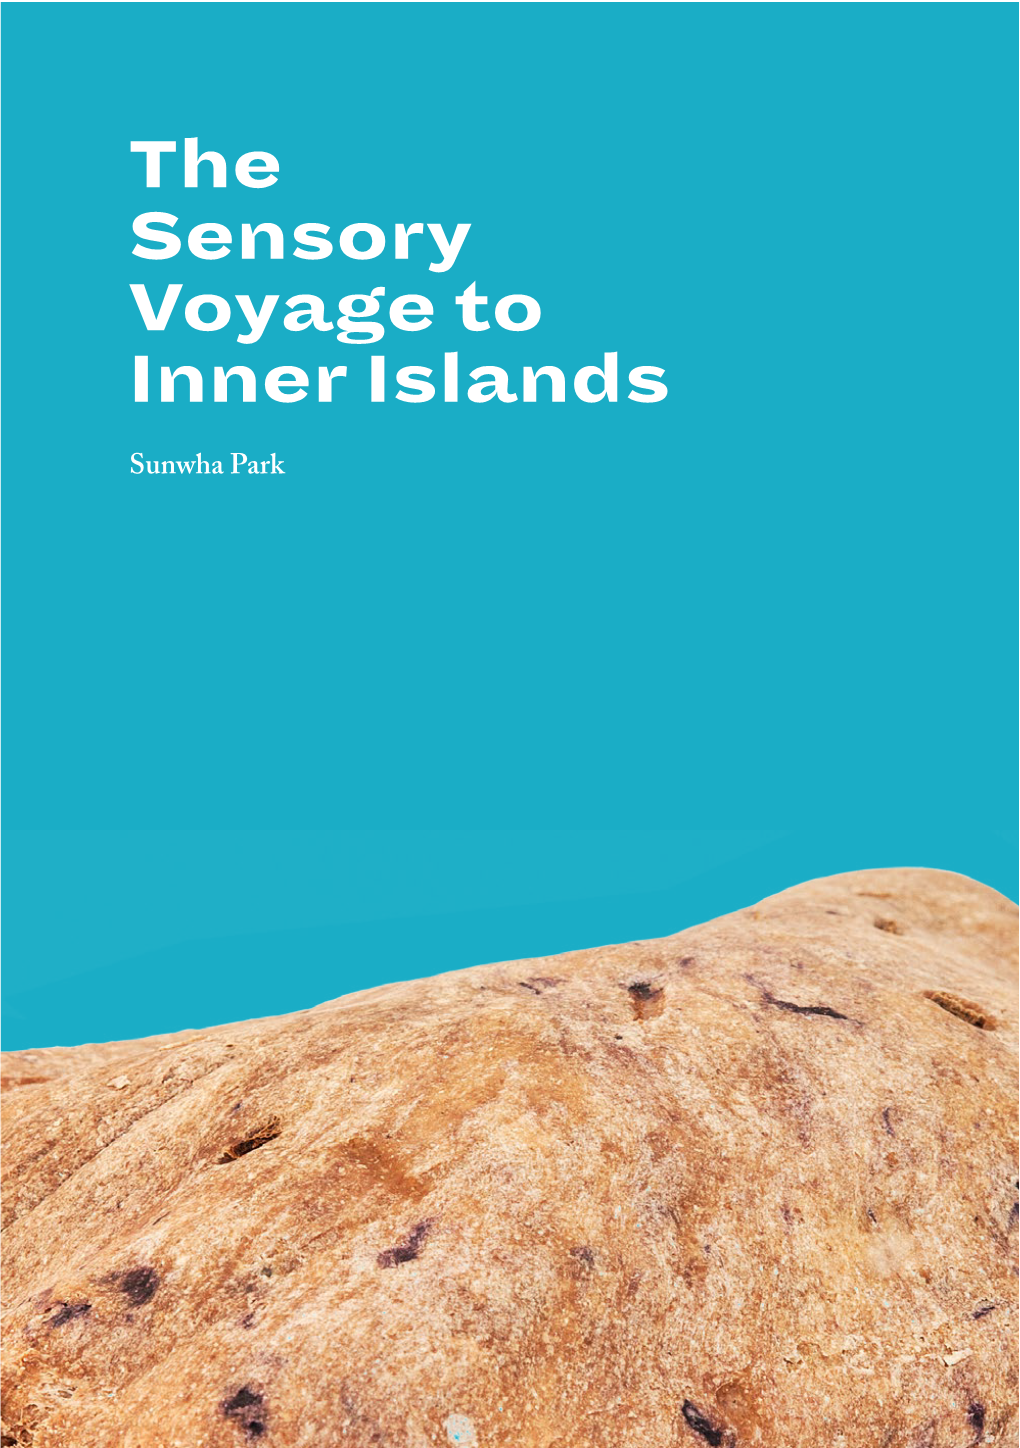 The Sensory Voyage to Inner Islands